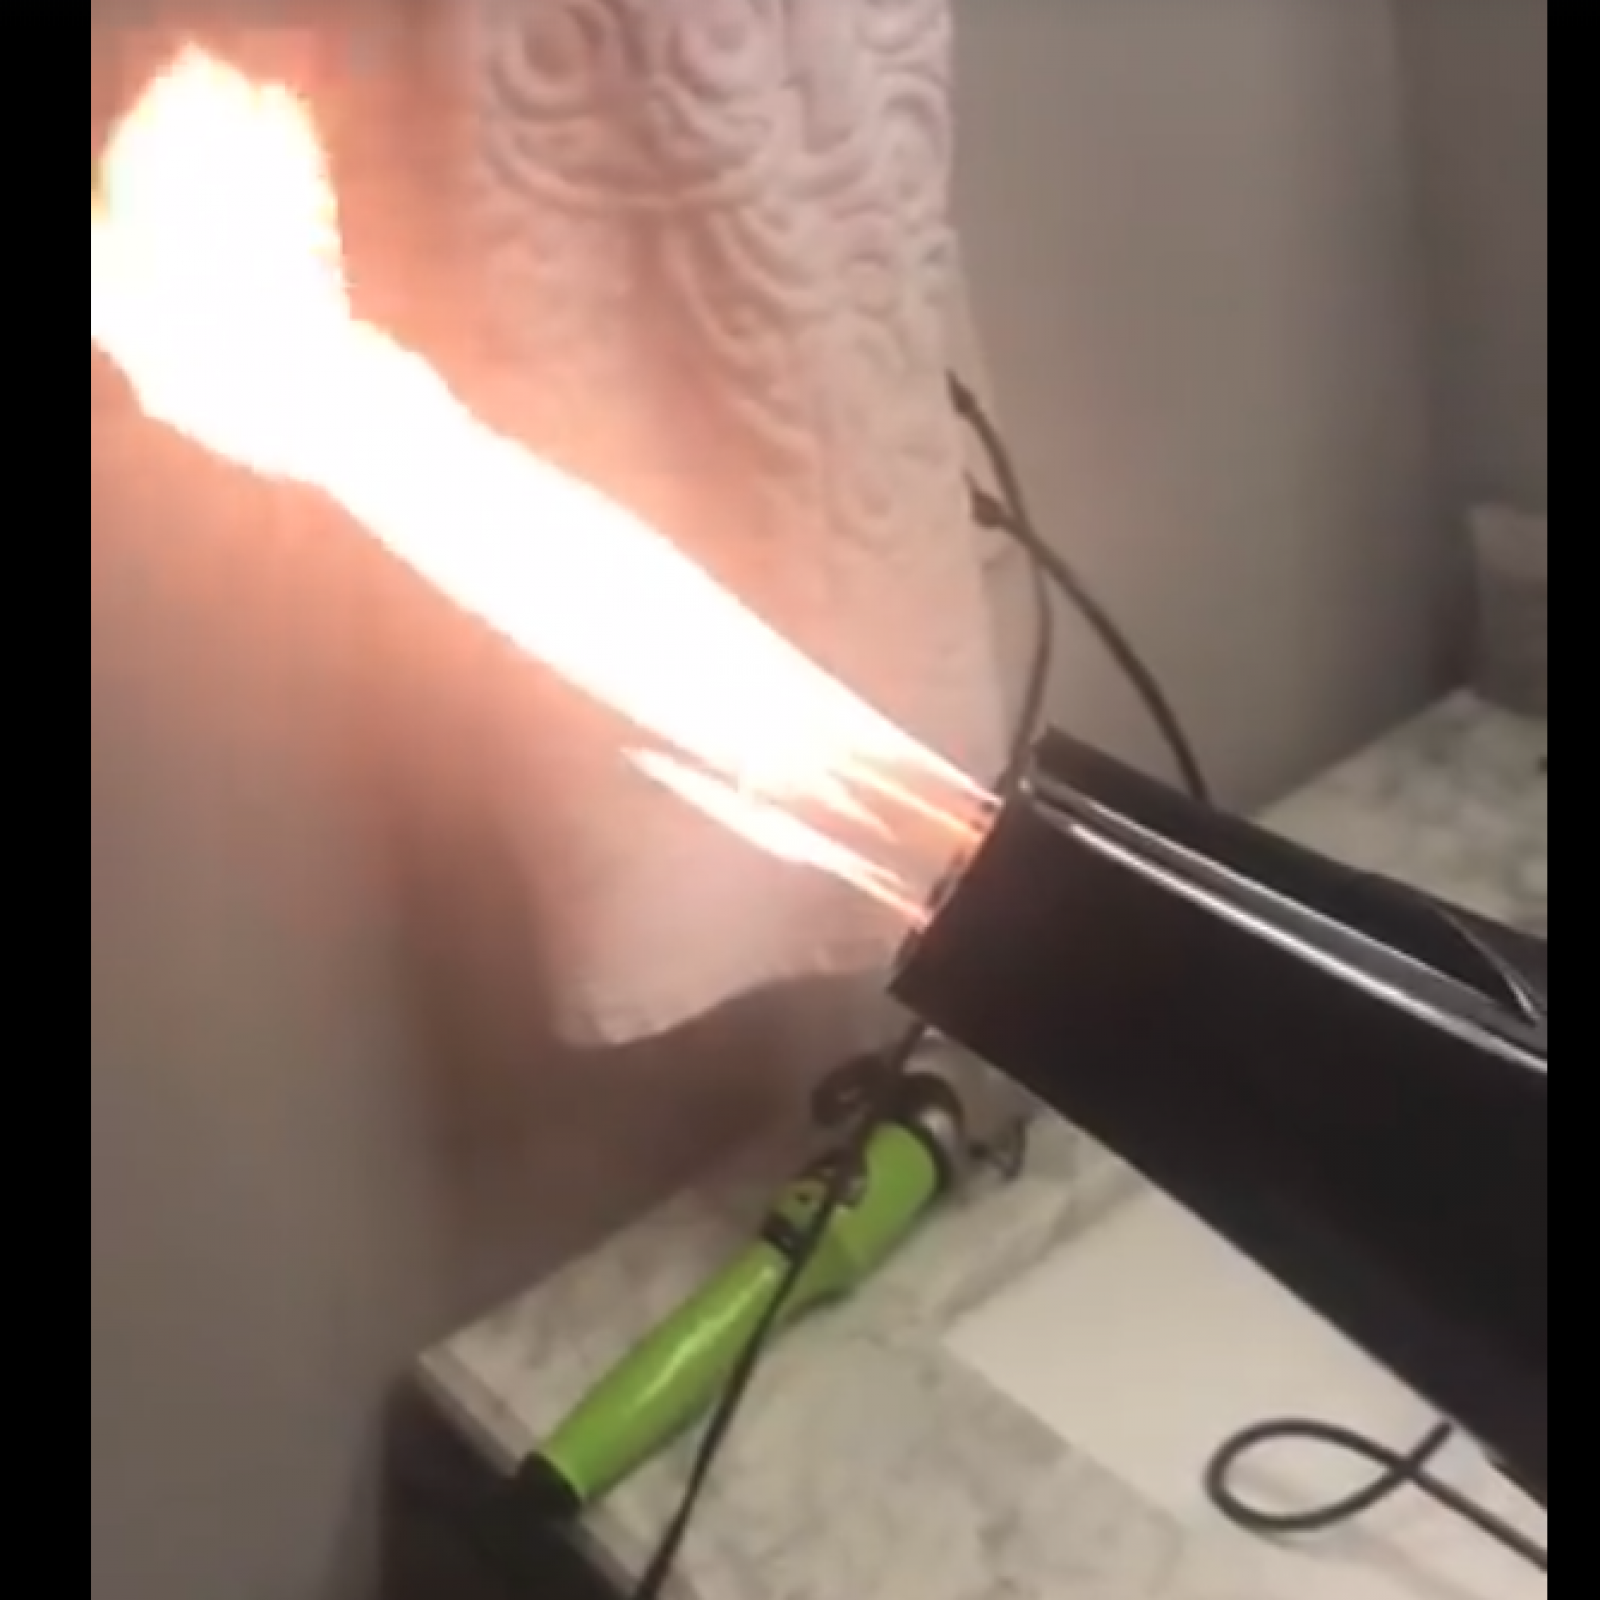 Watch: Amazon Stops Selling Hair Dryer after Woman Discovers it Shoots Fire